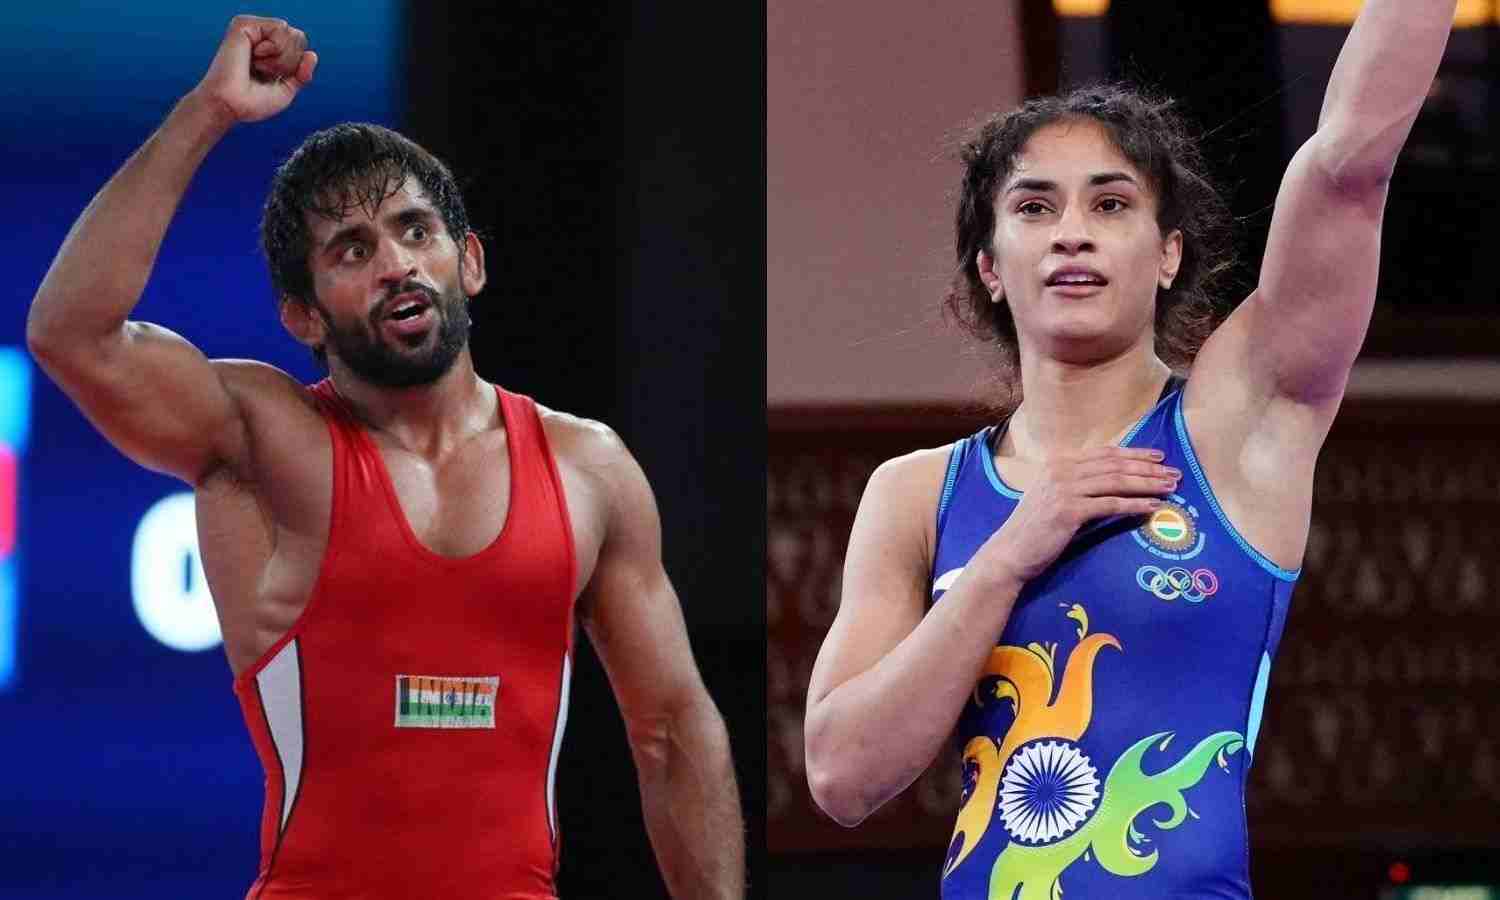 Bajrang Punia and Vinesh Phogat got exemption in trial